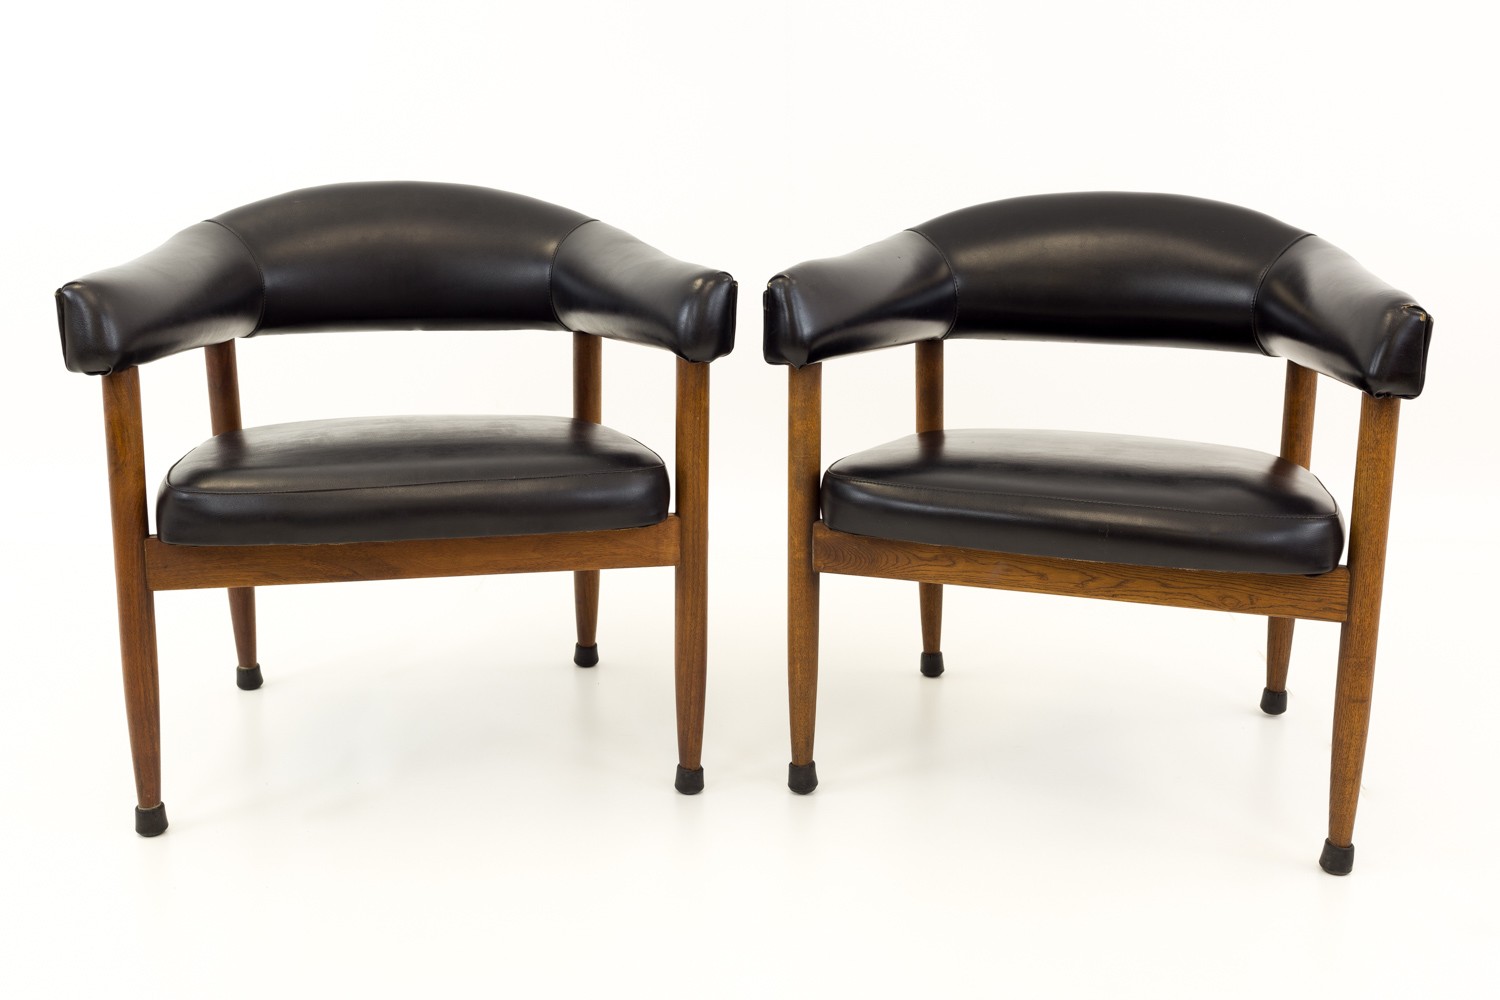 Arne Vodder Kodawood Style Mid Century Dining Occasional Chairs - Matching Pair